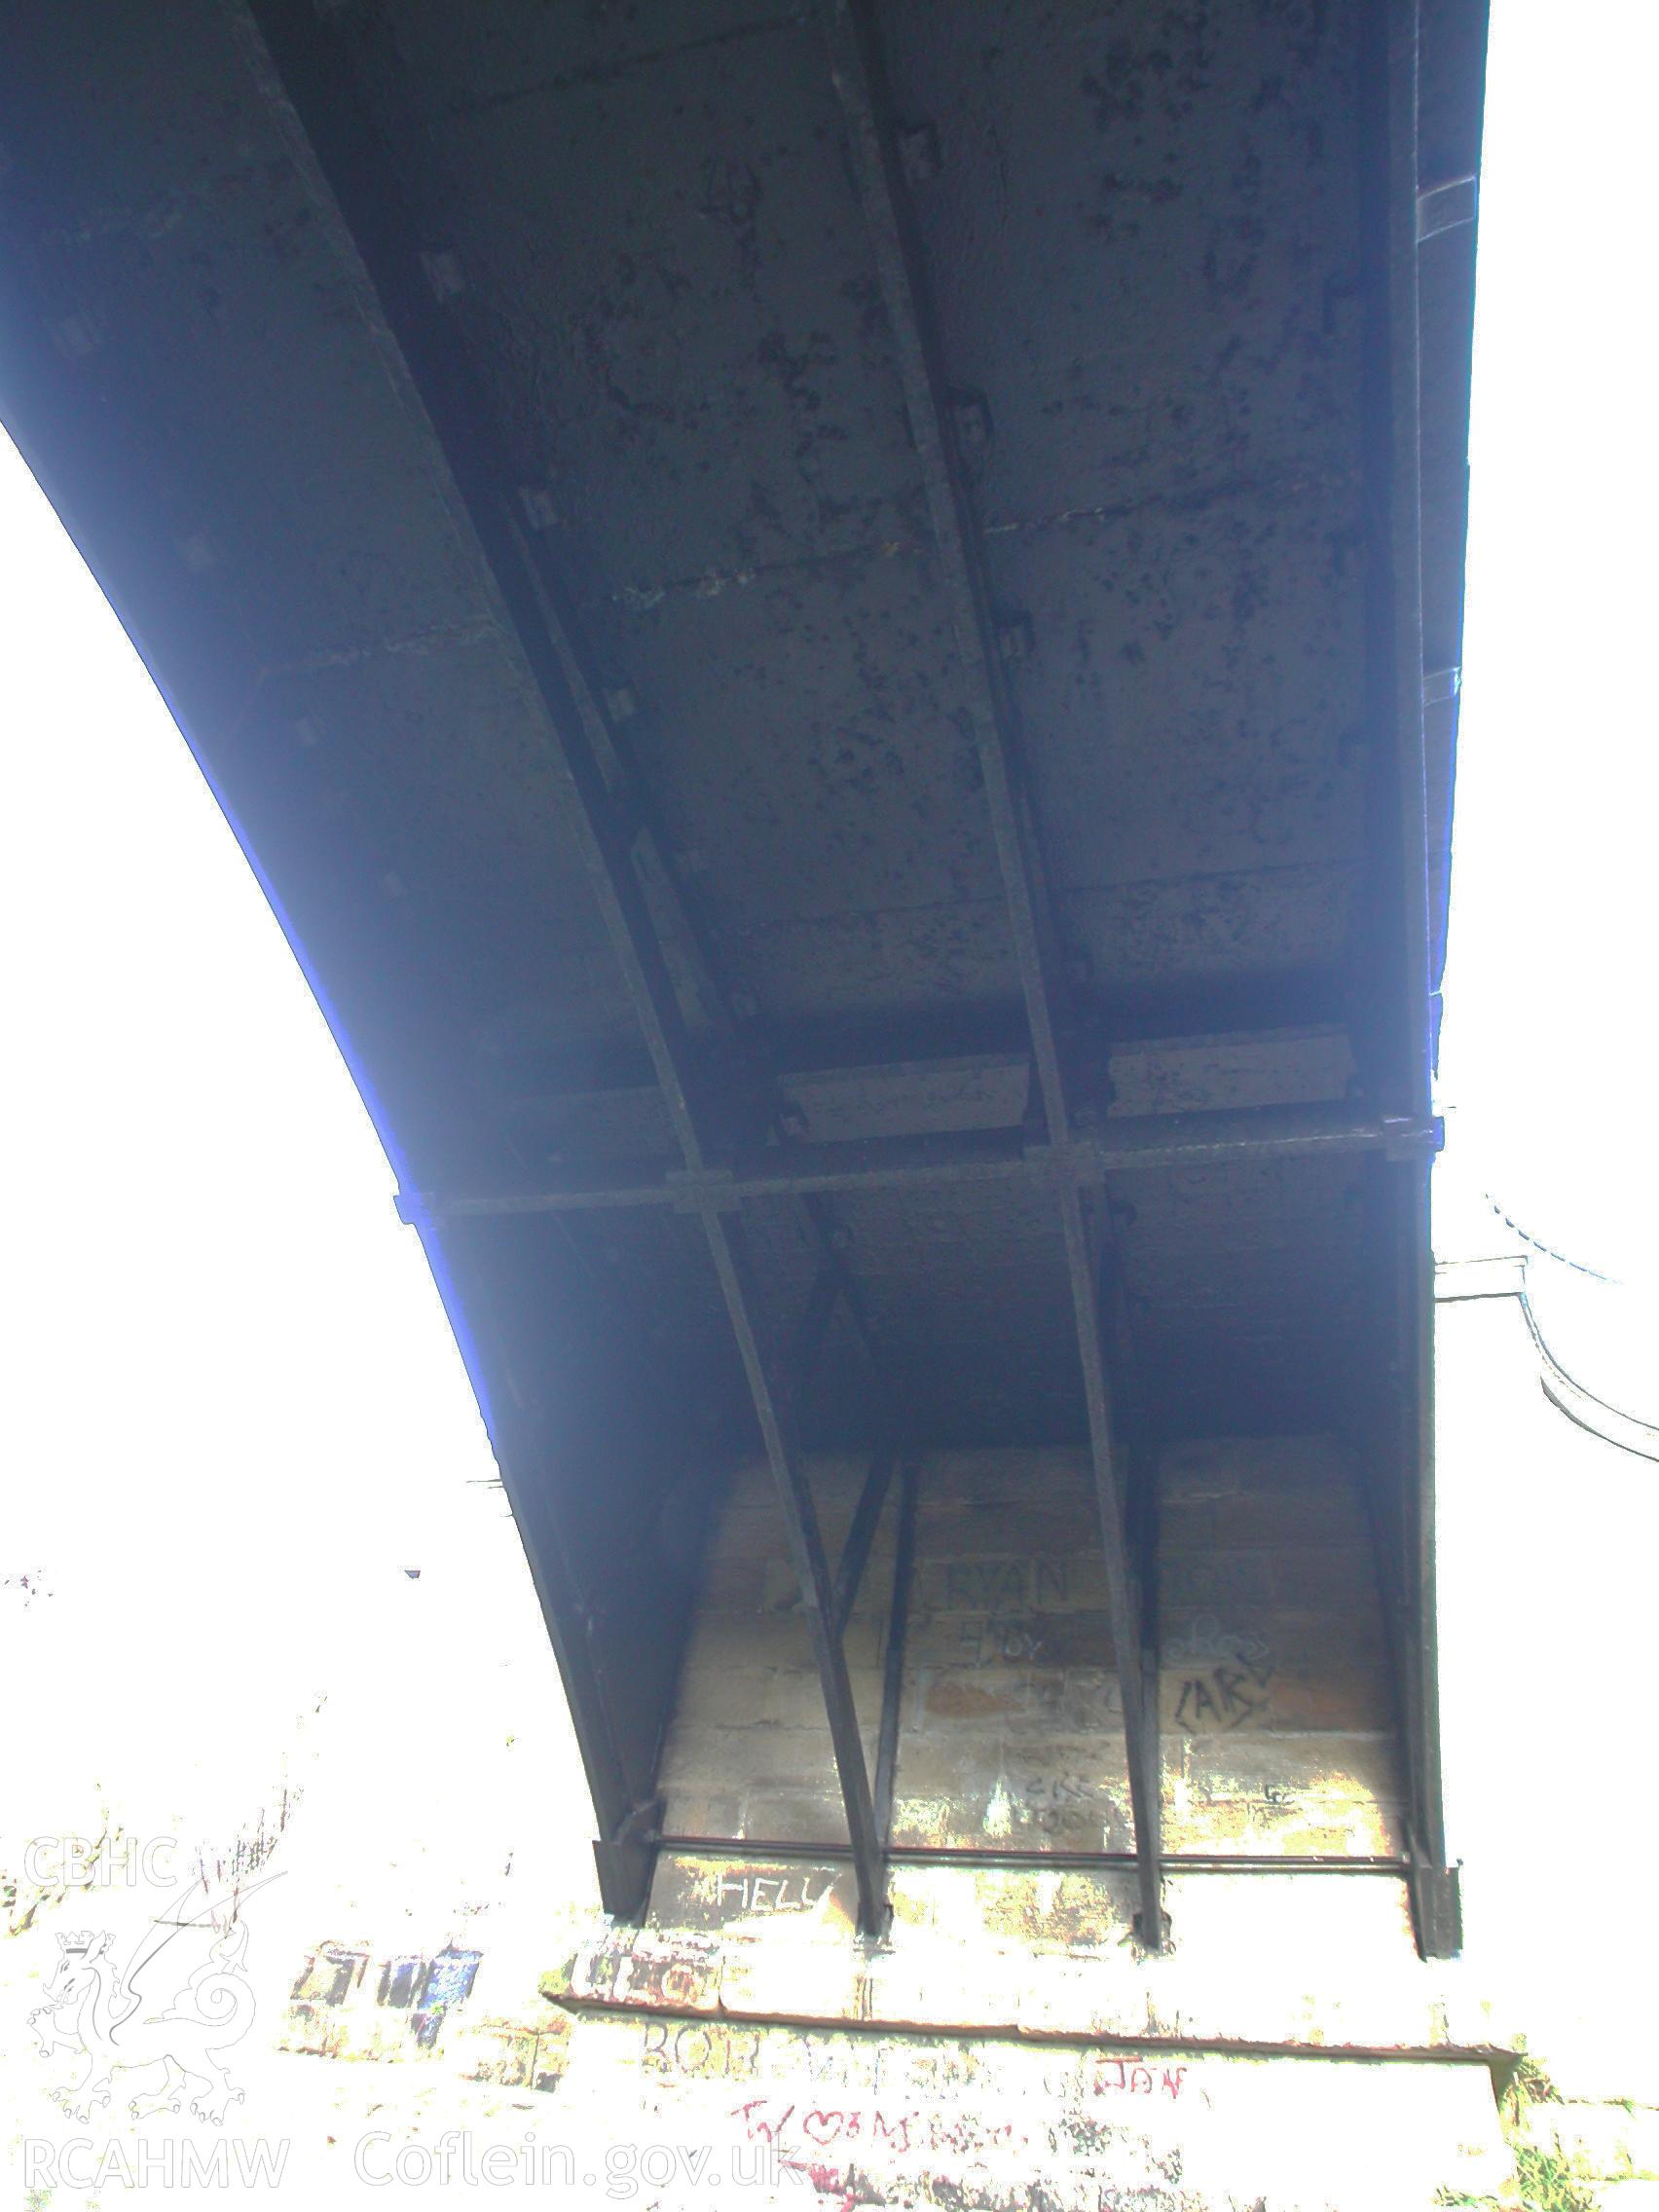 View of the underside of the northern cast-iron span lookinging north.